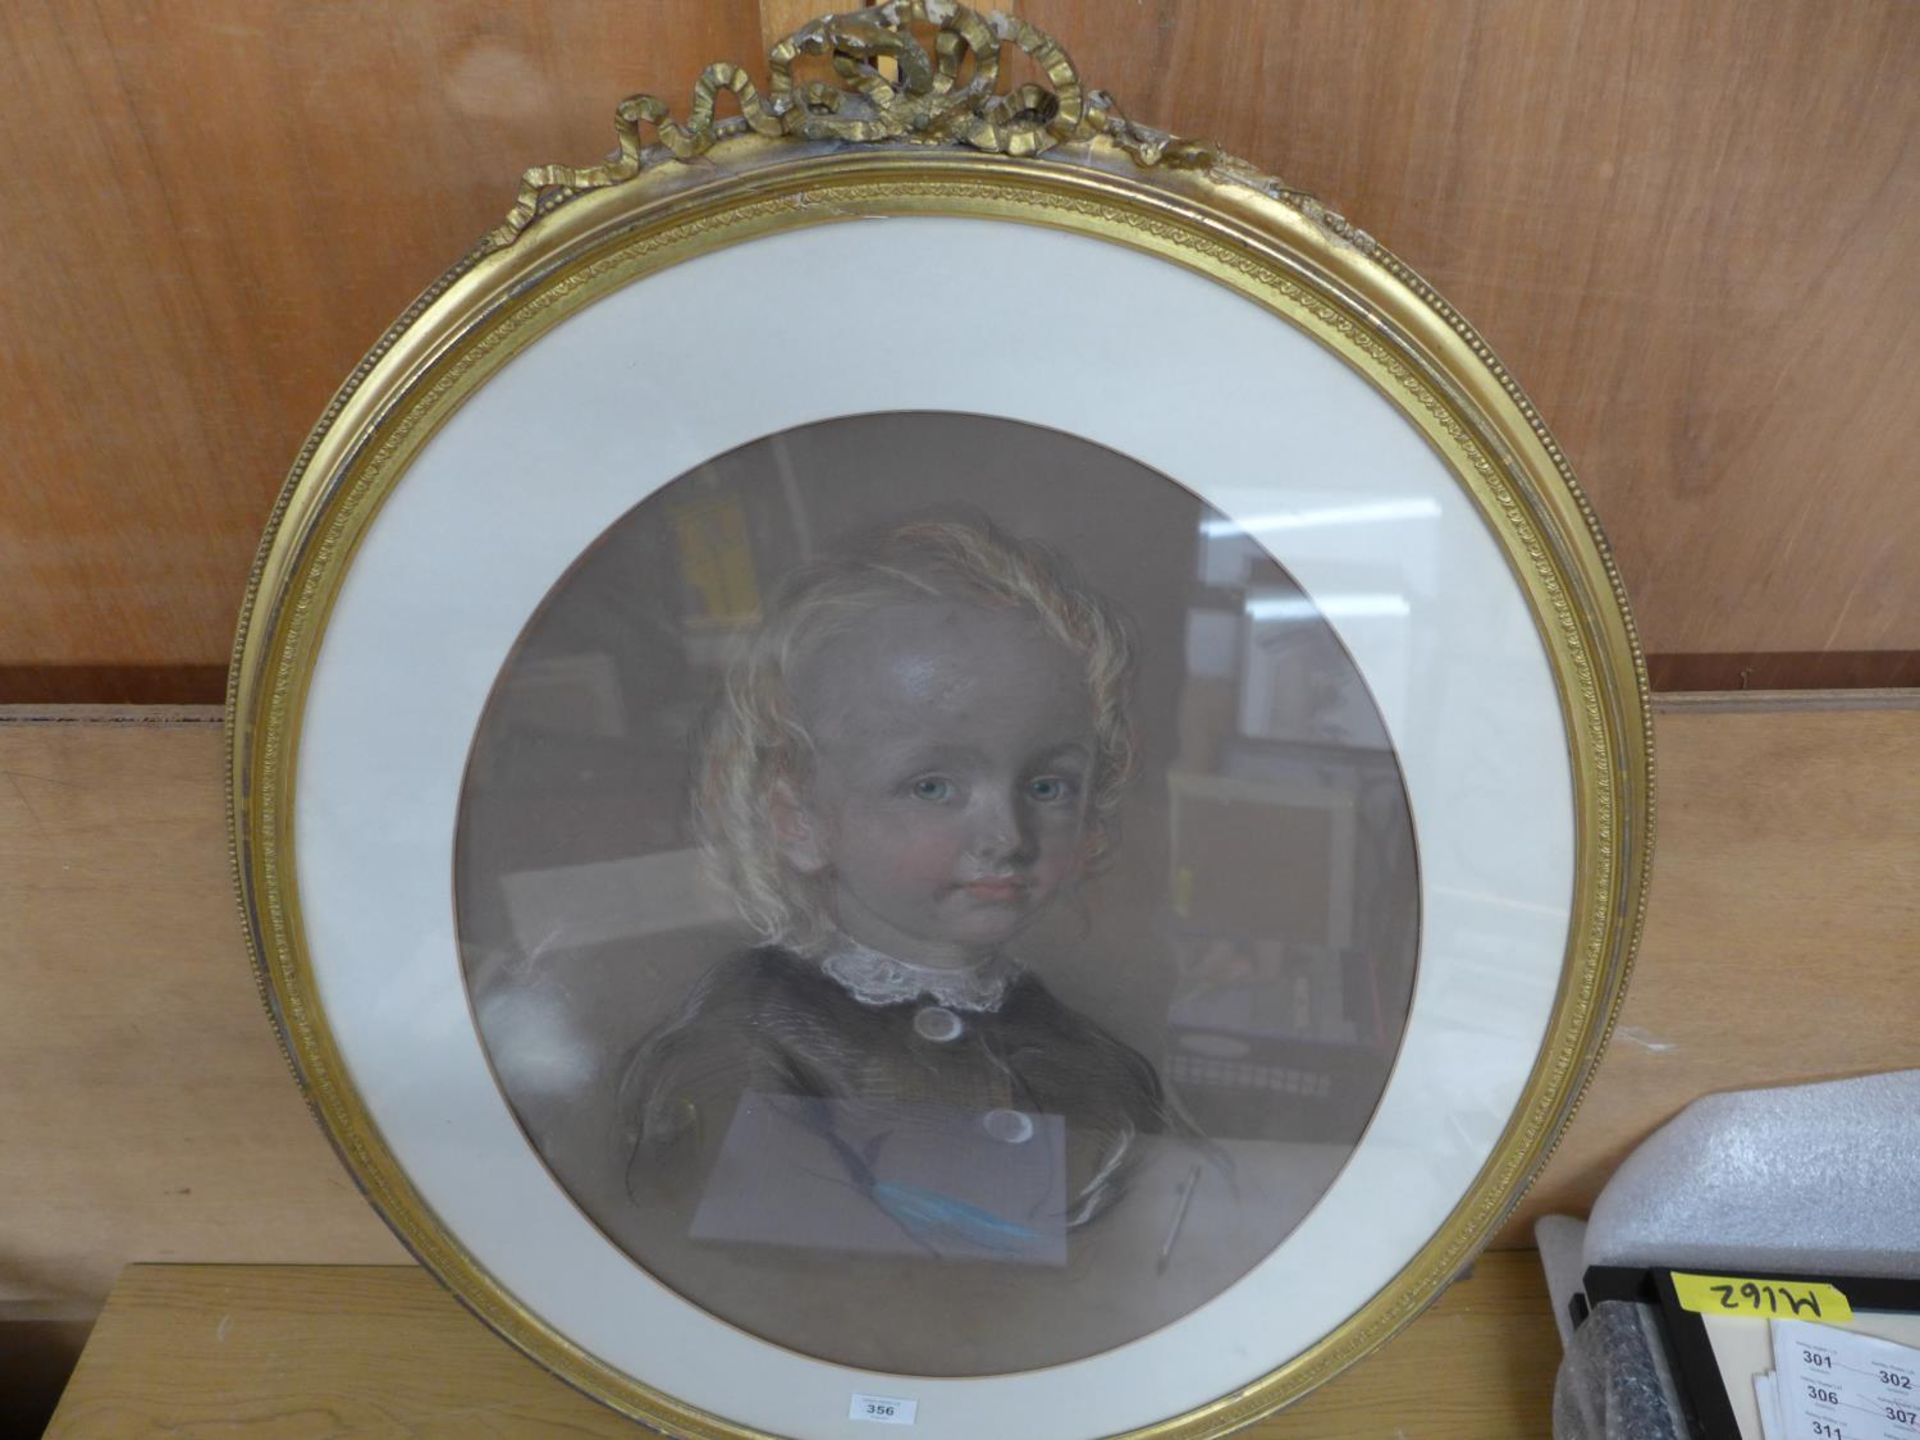 J.GILBERT (BRITISH 19TH CENTURY) PORTRAIT OF A YOUNG BOY, OVAL, PASTEL, SIGNED AND DATED 1868,